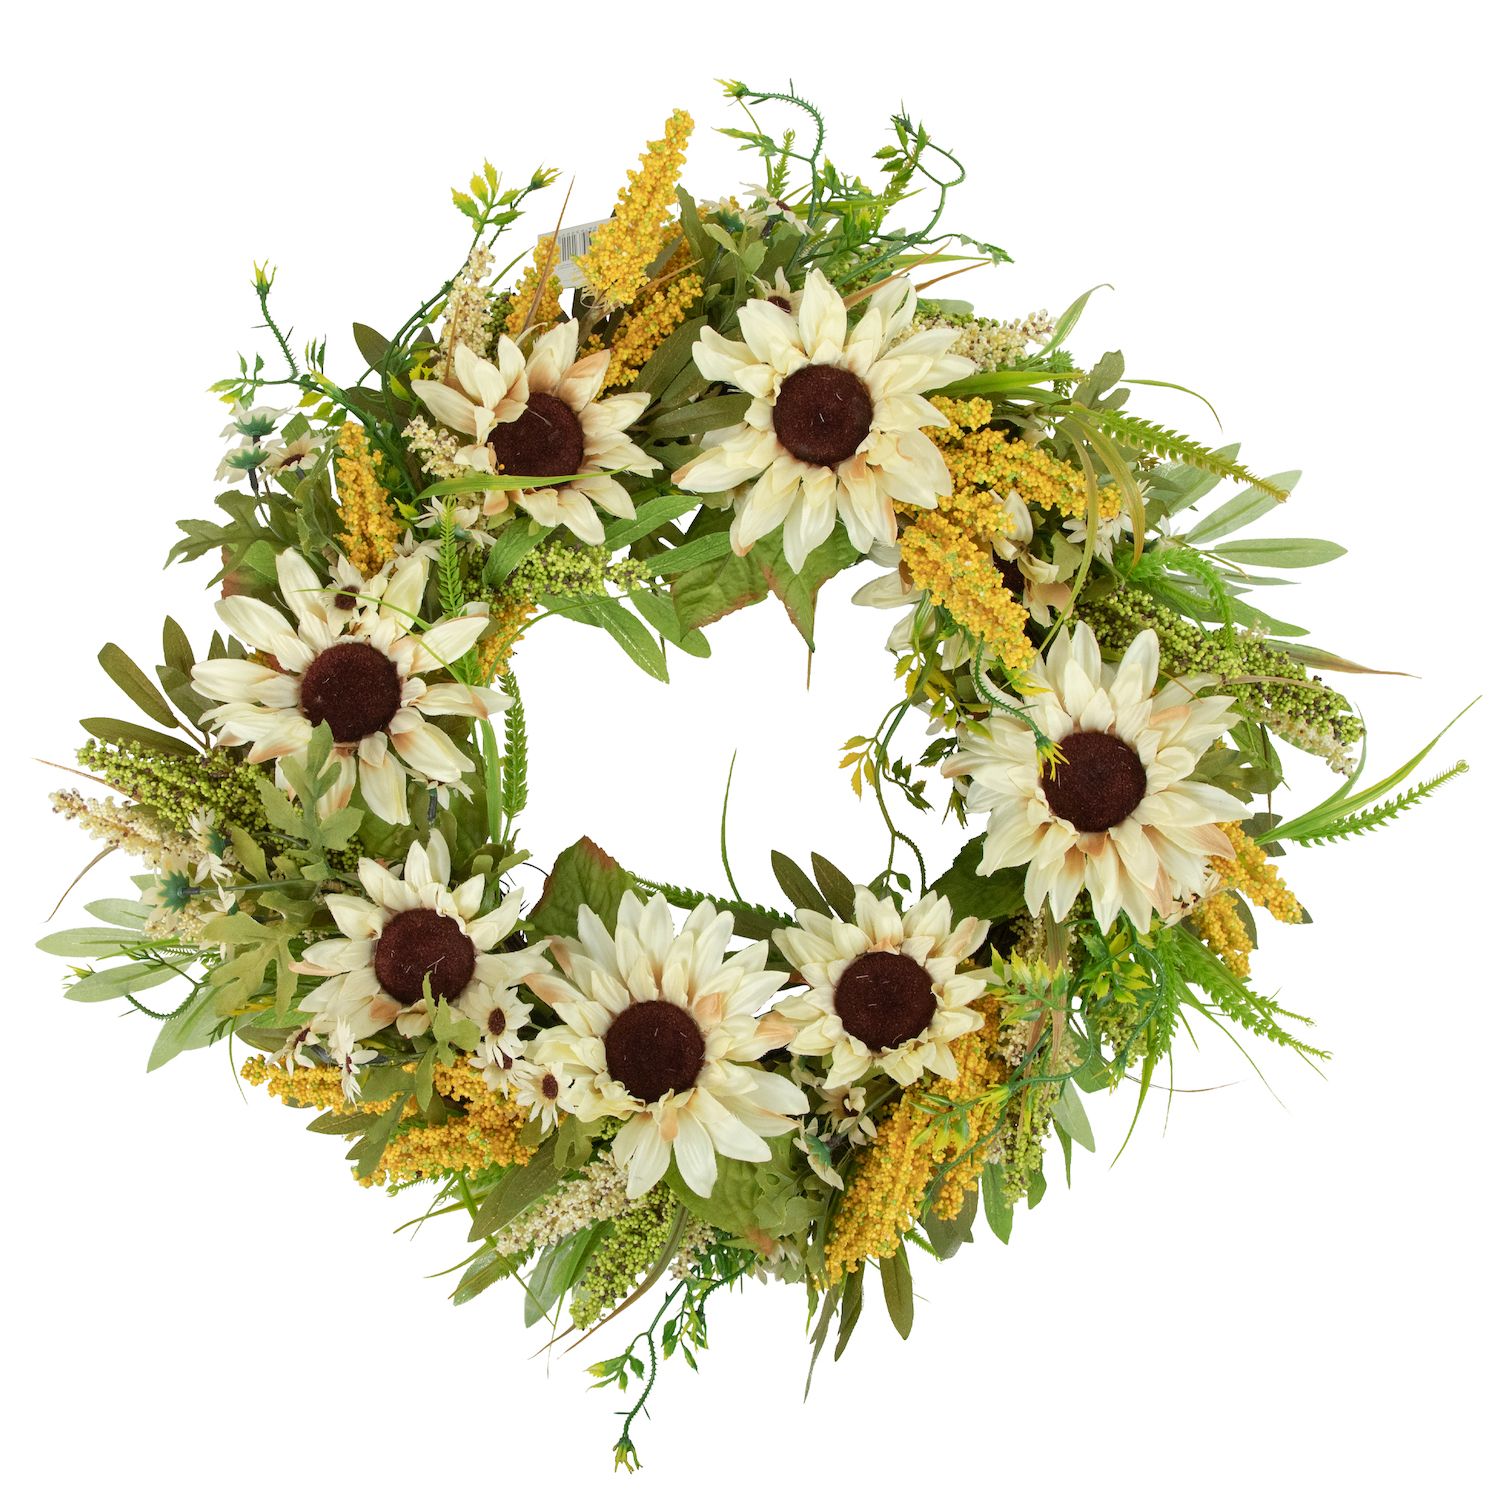 2 Bunches Artificial Sunflowers with Stems for Faux Floral Arrangements,  Table Centerpieces, Wedding Decor (13.5 In)